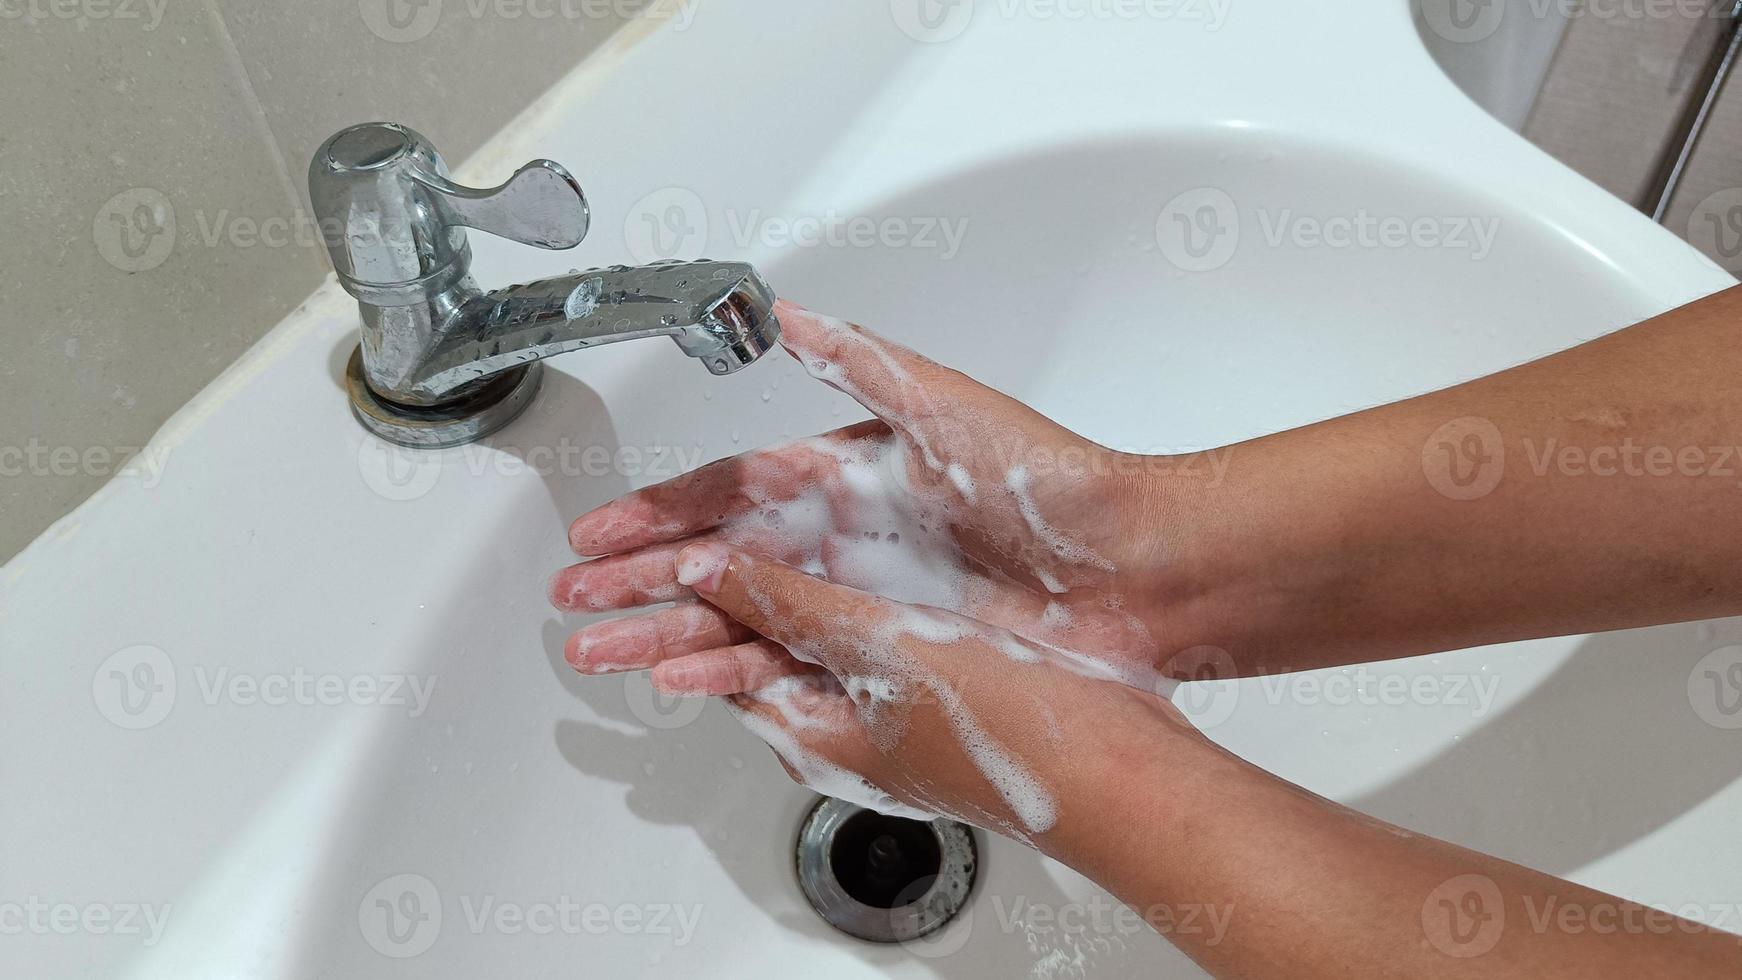 Women are washing their hands photo